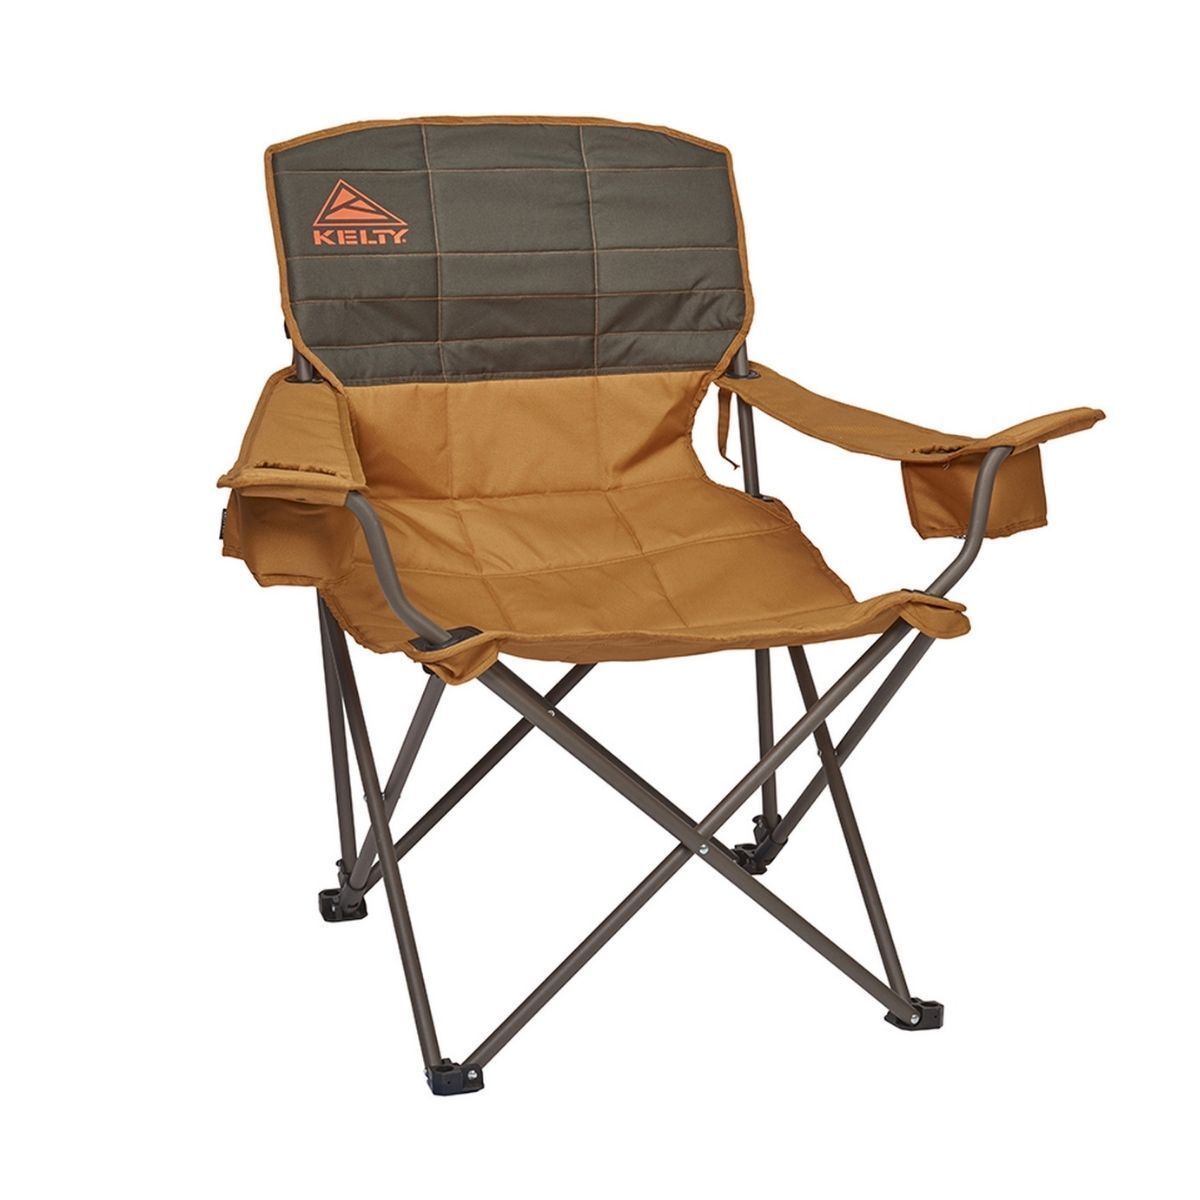 Kelty Deluxe Lounge Chair - Camp chair